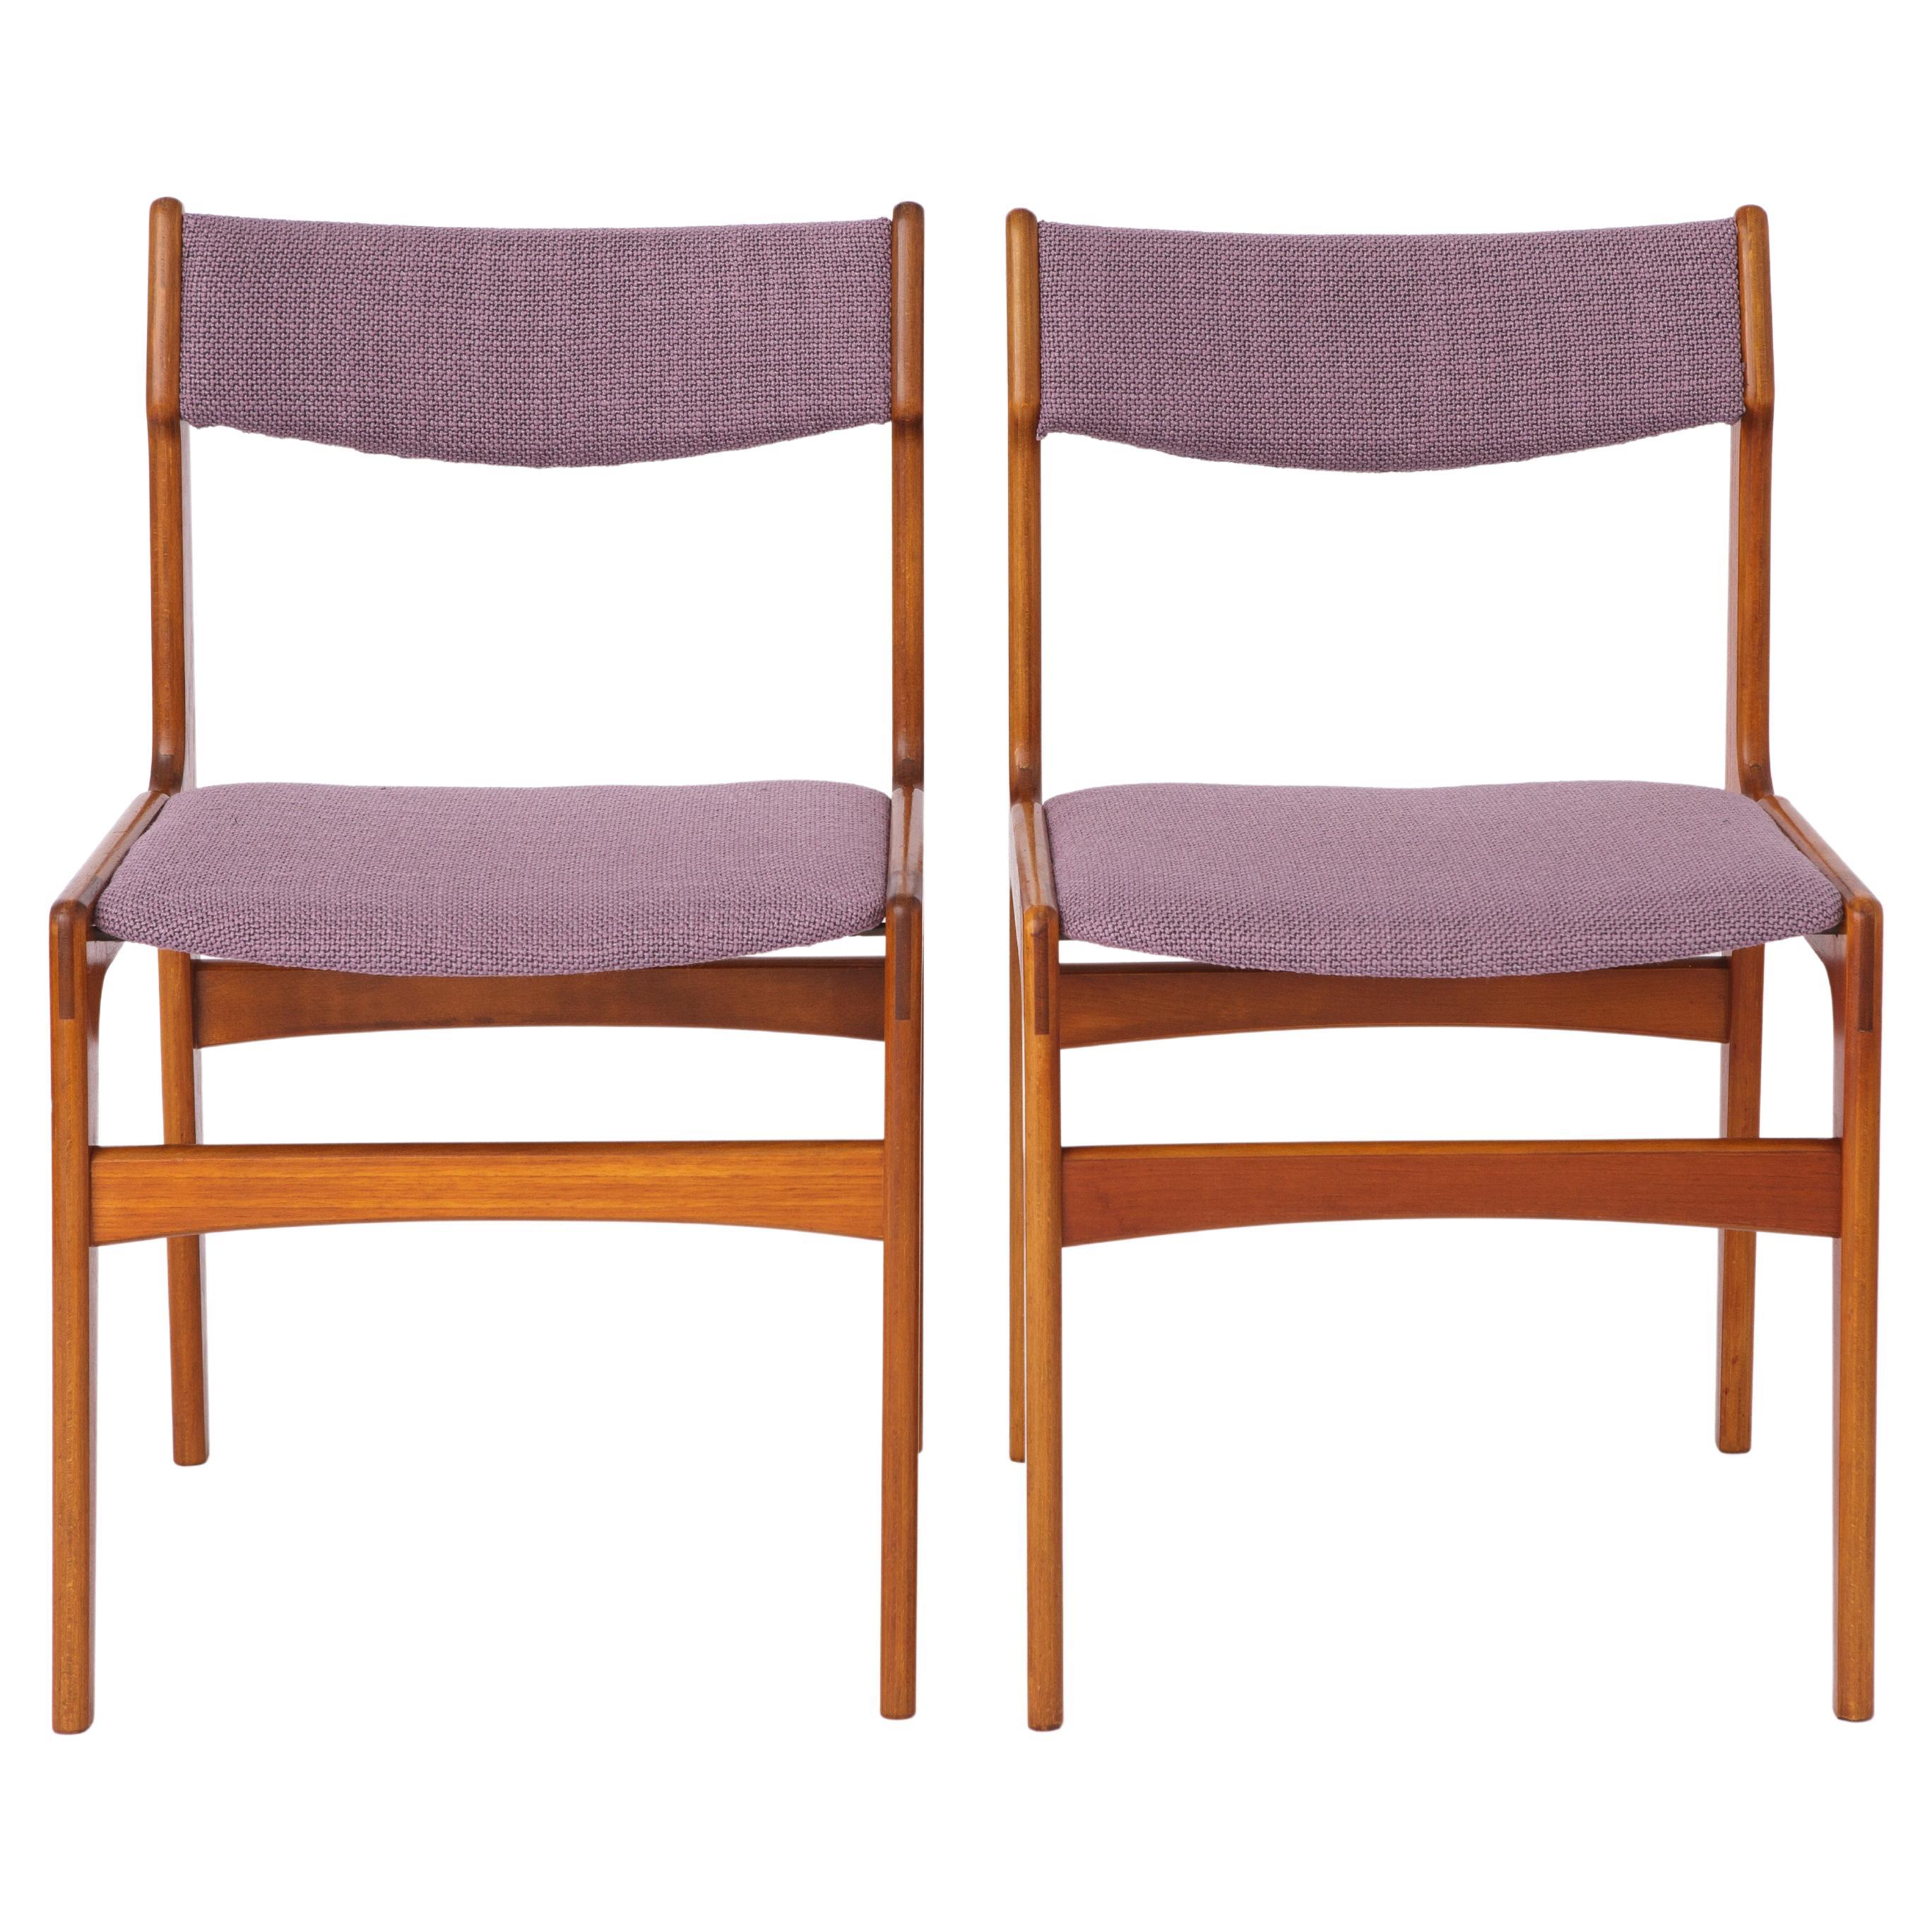 Pair mid century vintage chairs, 1960s, Danish For Sale